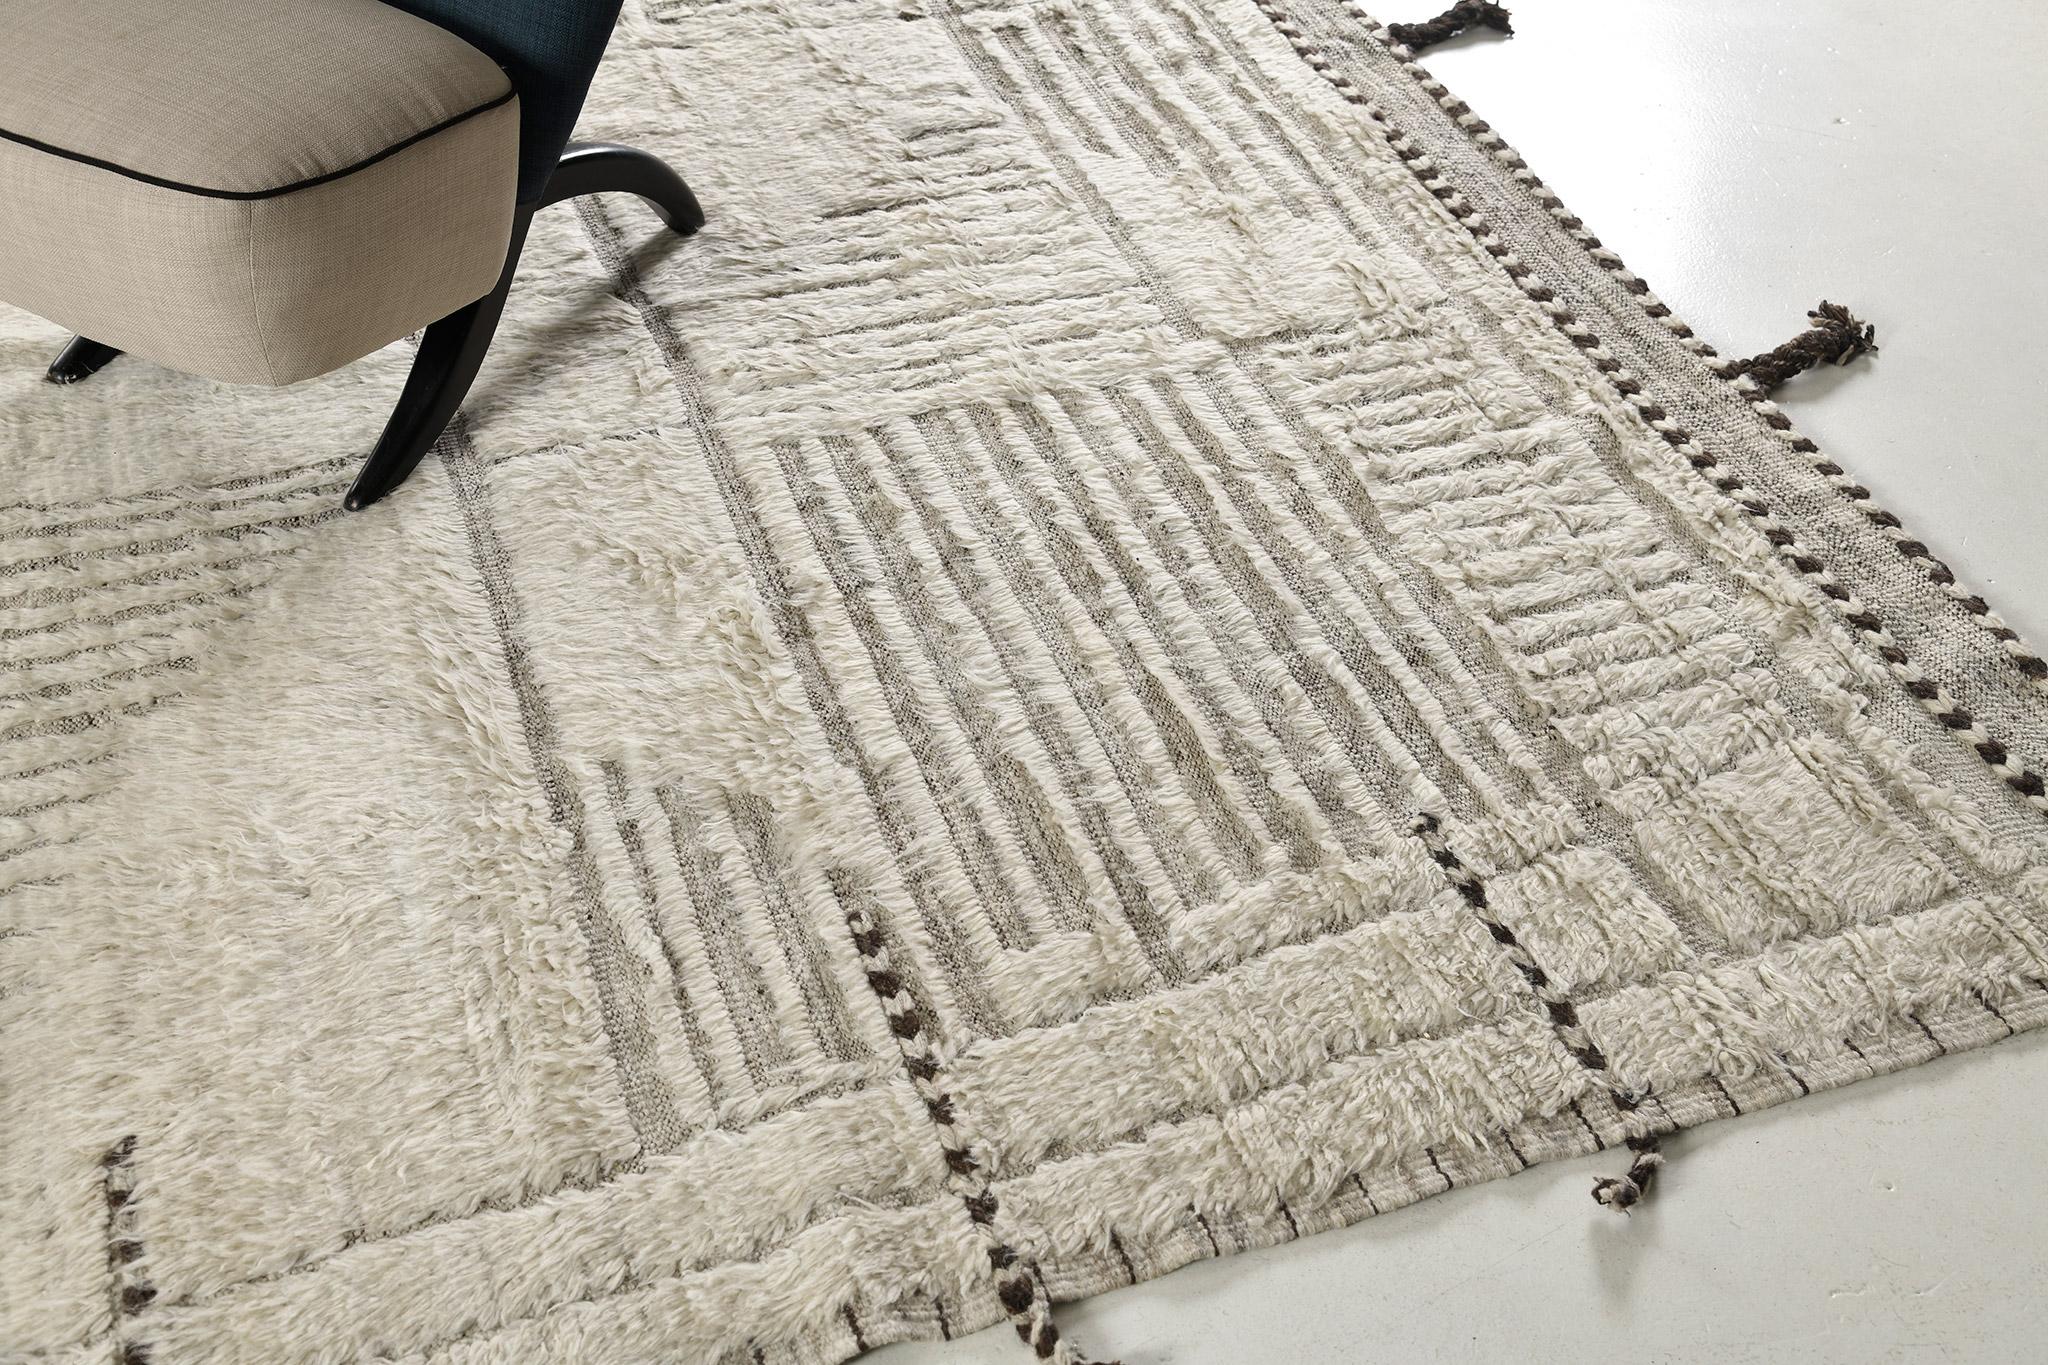 Tisent has a beautiful embossed wool that features various linear strokes. Its warm tone complements your modern contemporary interior and will definitely fascinate the eyes of your guests. This rug plays with textures, linework, and simplicity